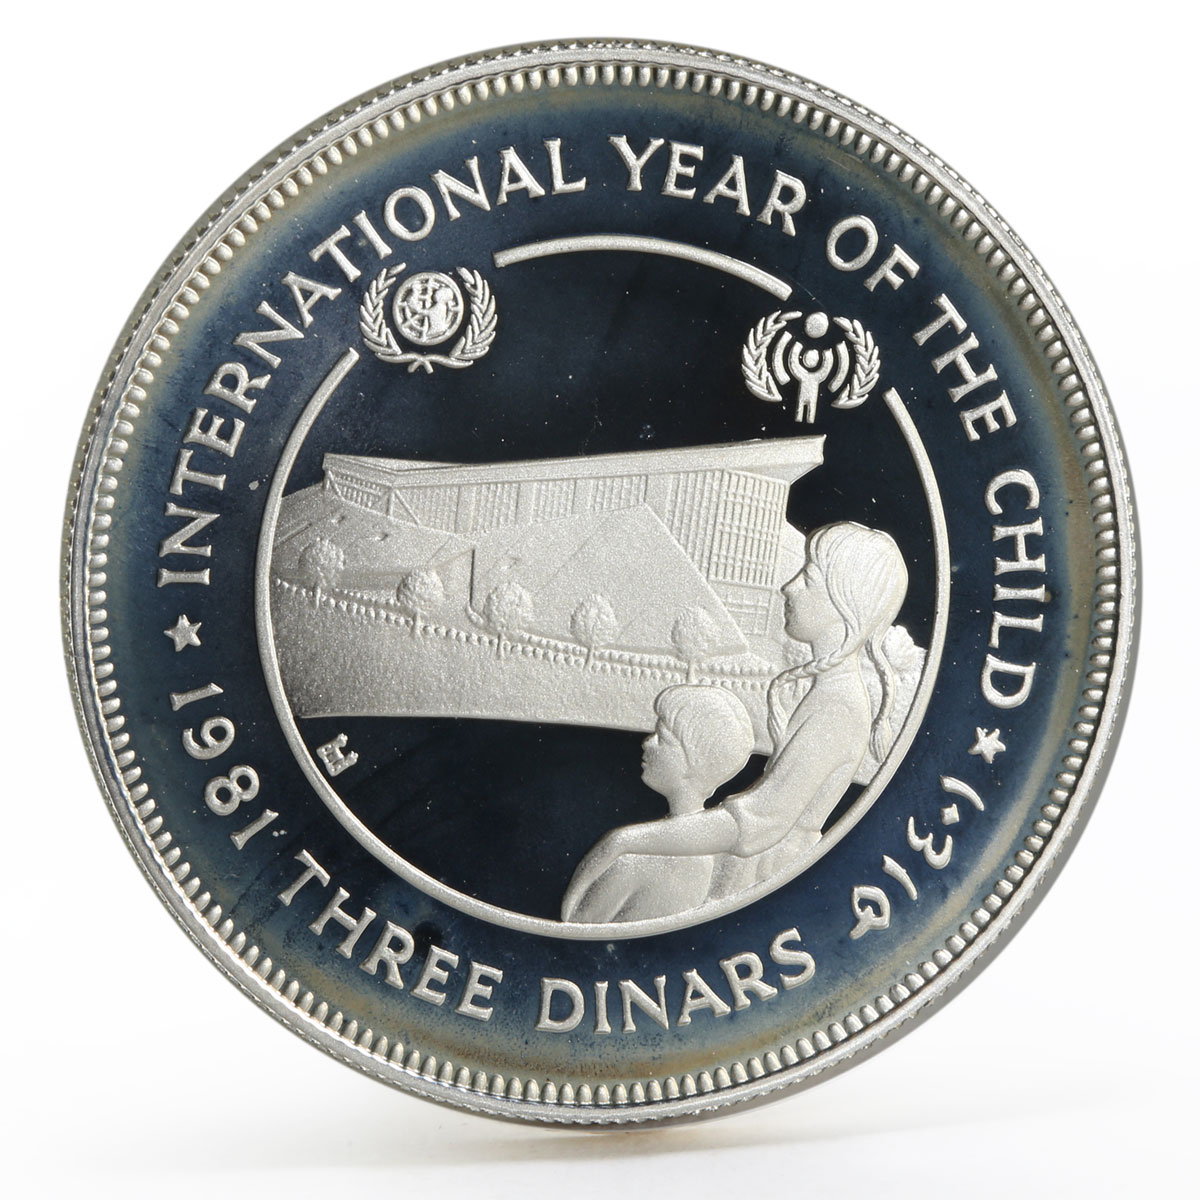 Jordan 3 dinars International Year of the Child proof silver coin 1981